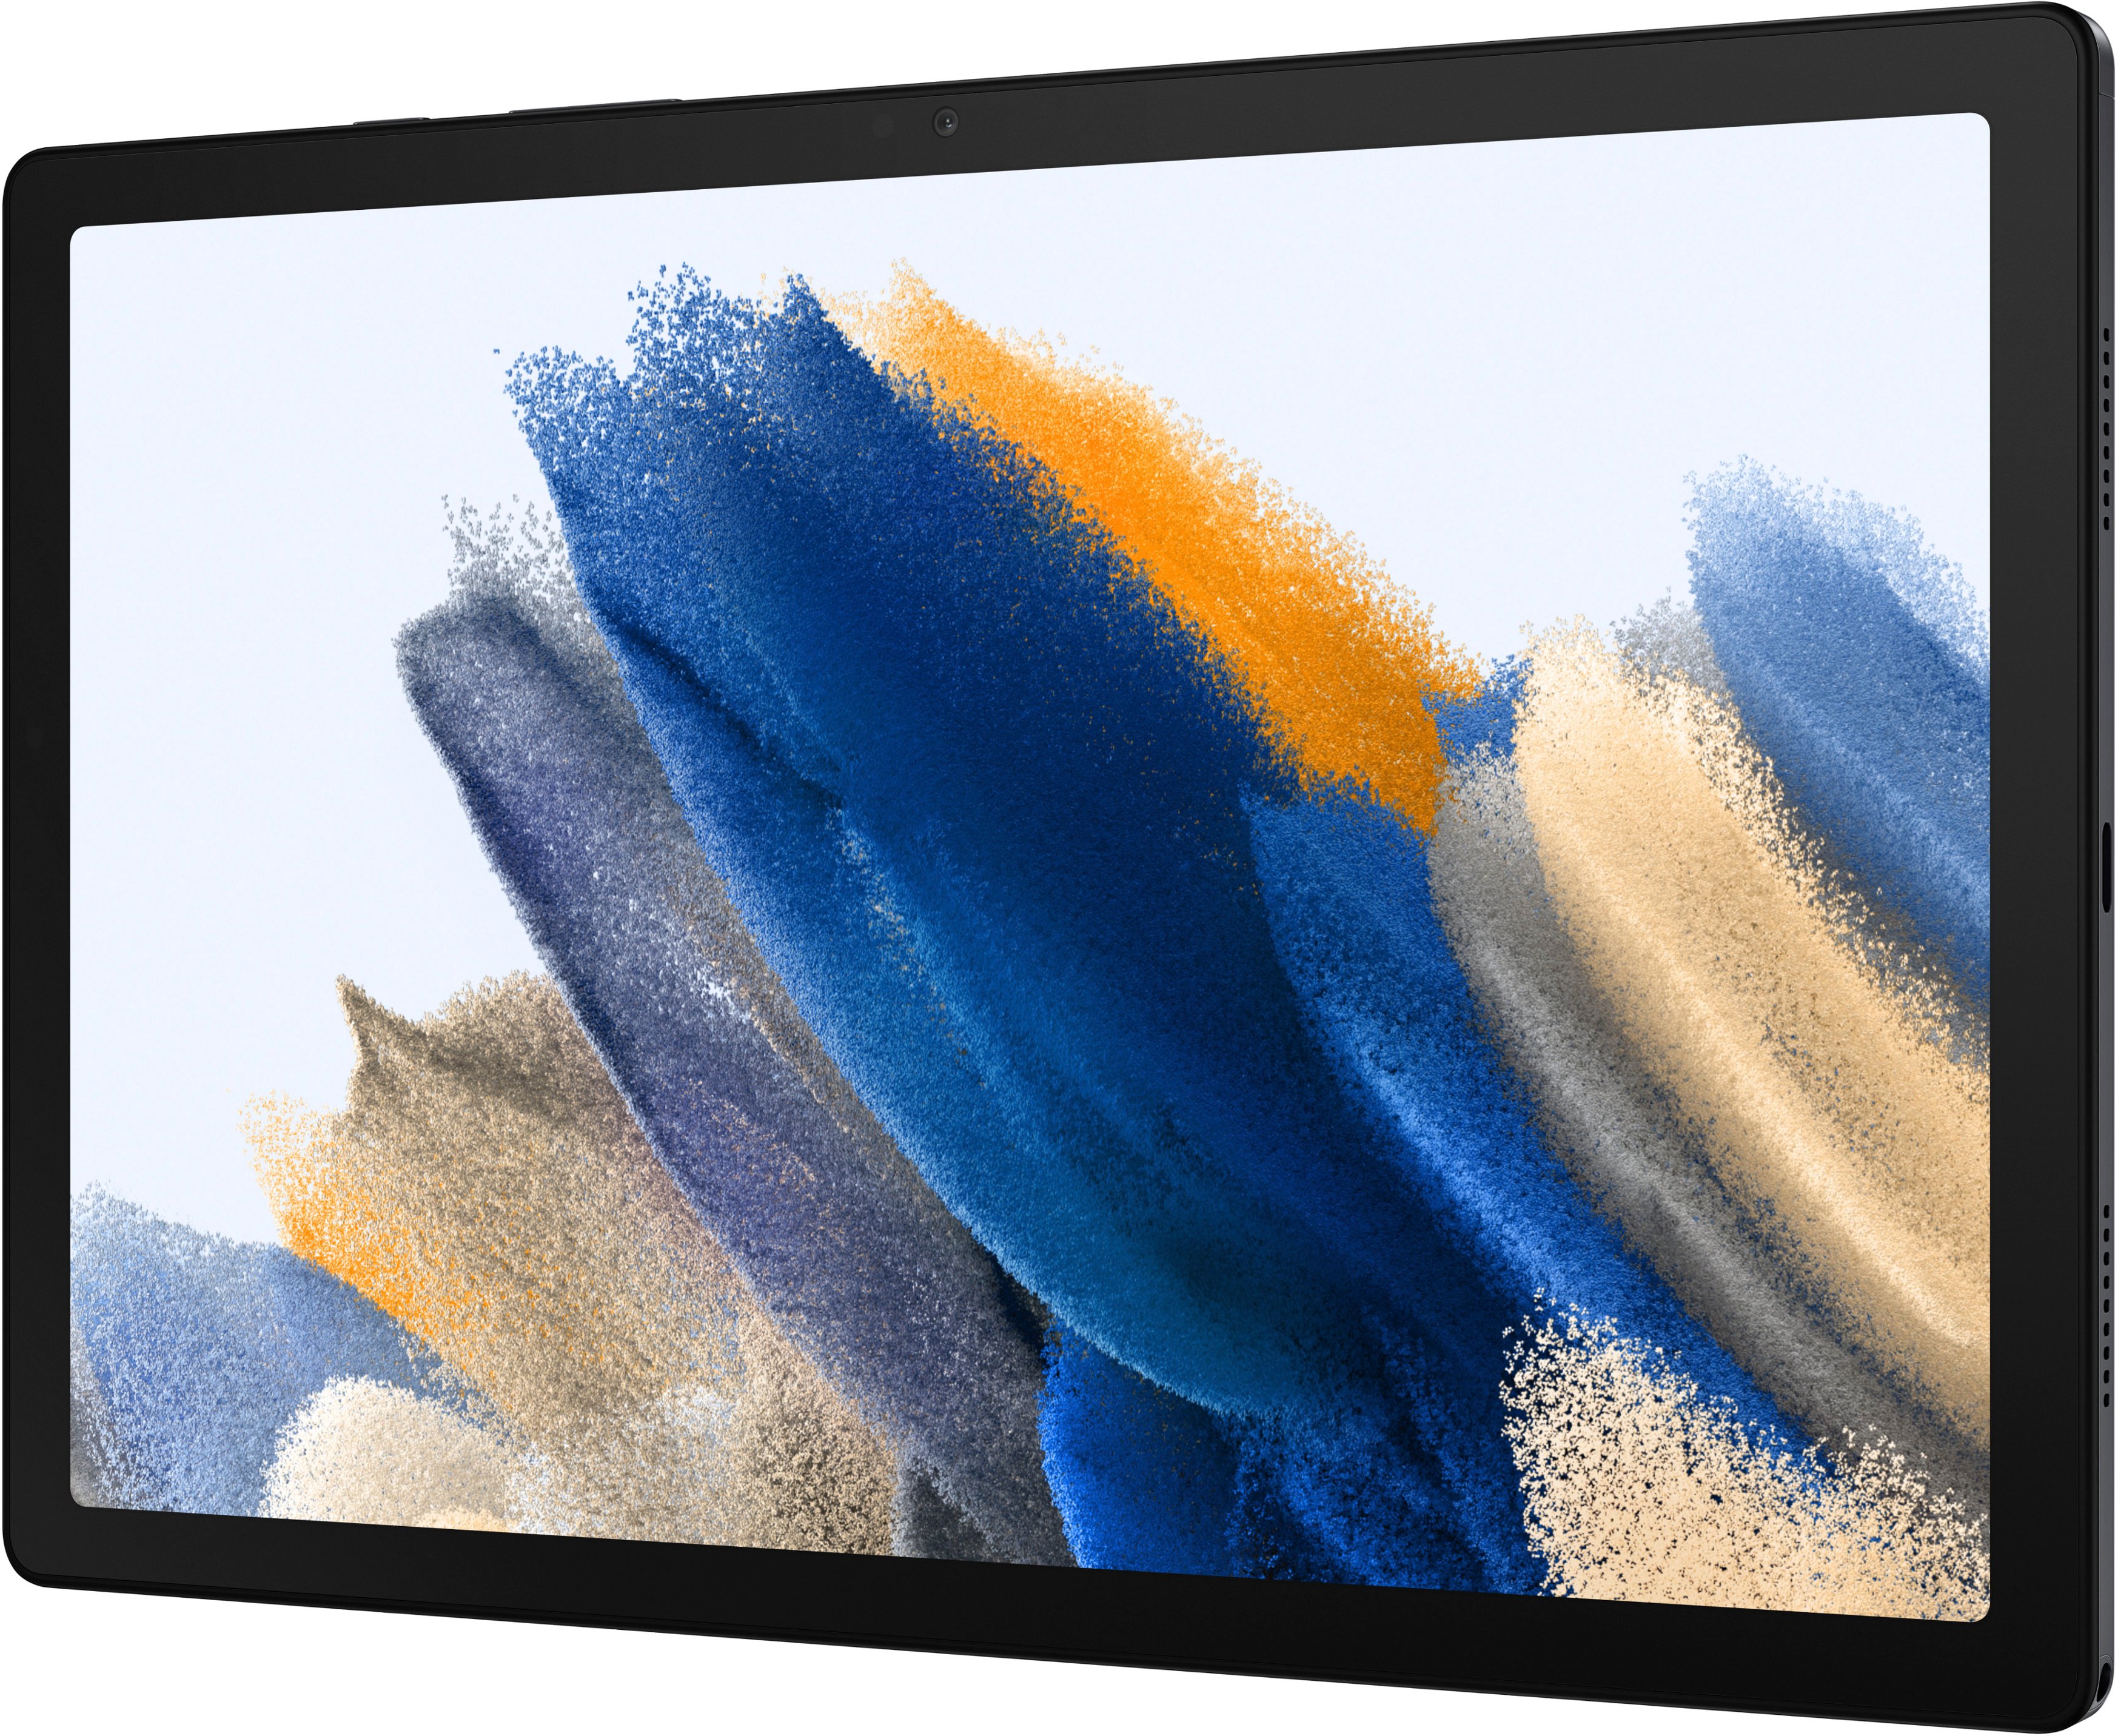 Angle View: Microsoft - Surface Pro 7+ - 12.3” Touch Screen – Intel Core i5 – 8GB Memory – 128GB SSD with Black Type Cover (Latest Model) - Platinum